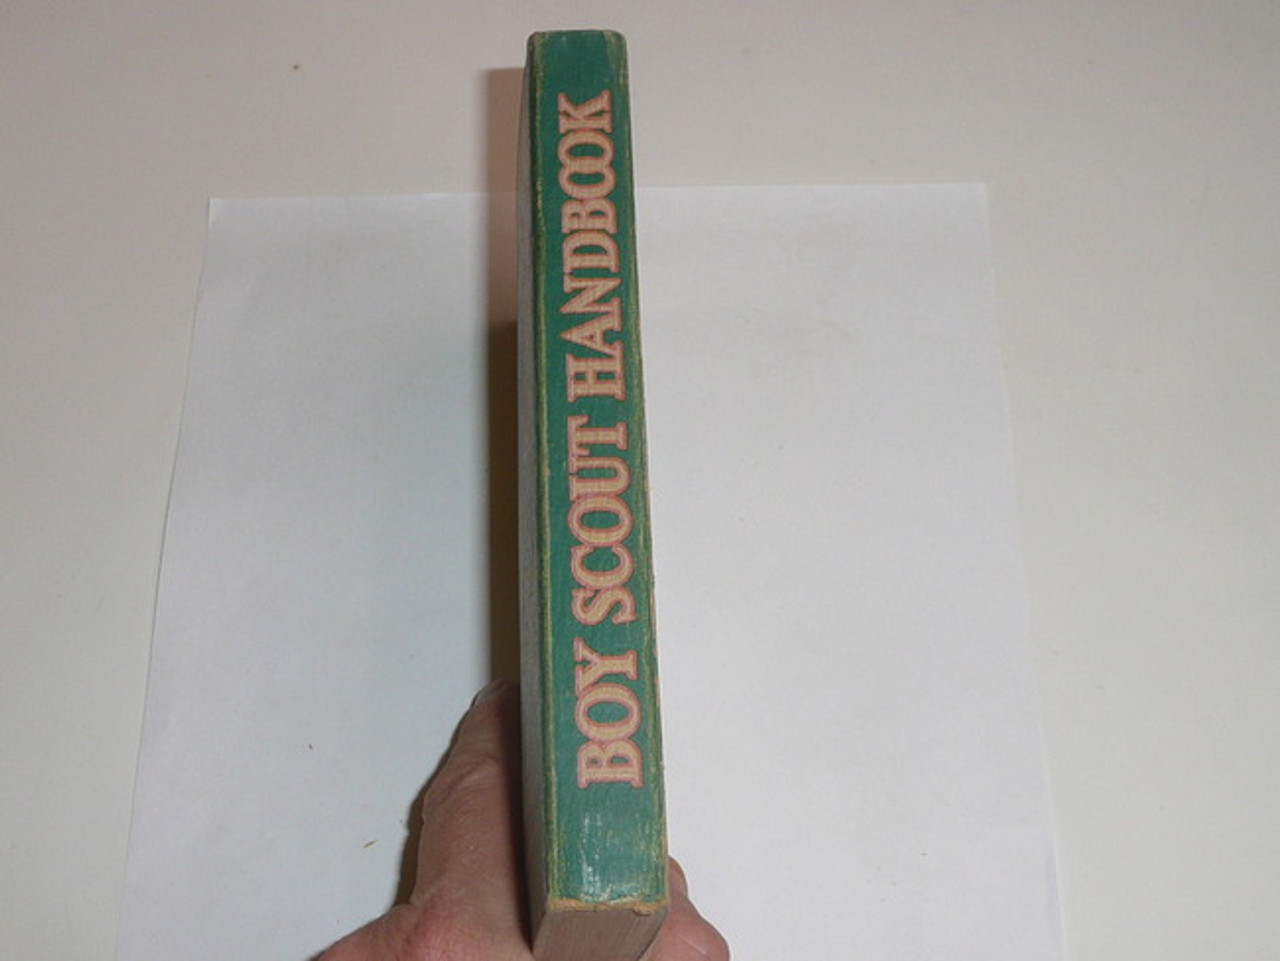 1942 Boy Scout Handbook, Fourth Edition, Thirty-fifth Printing, Norman Rockwell Cover, some wear but solid condition